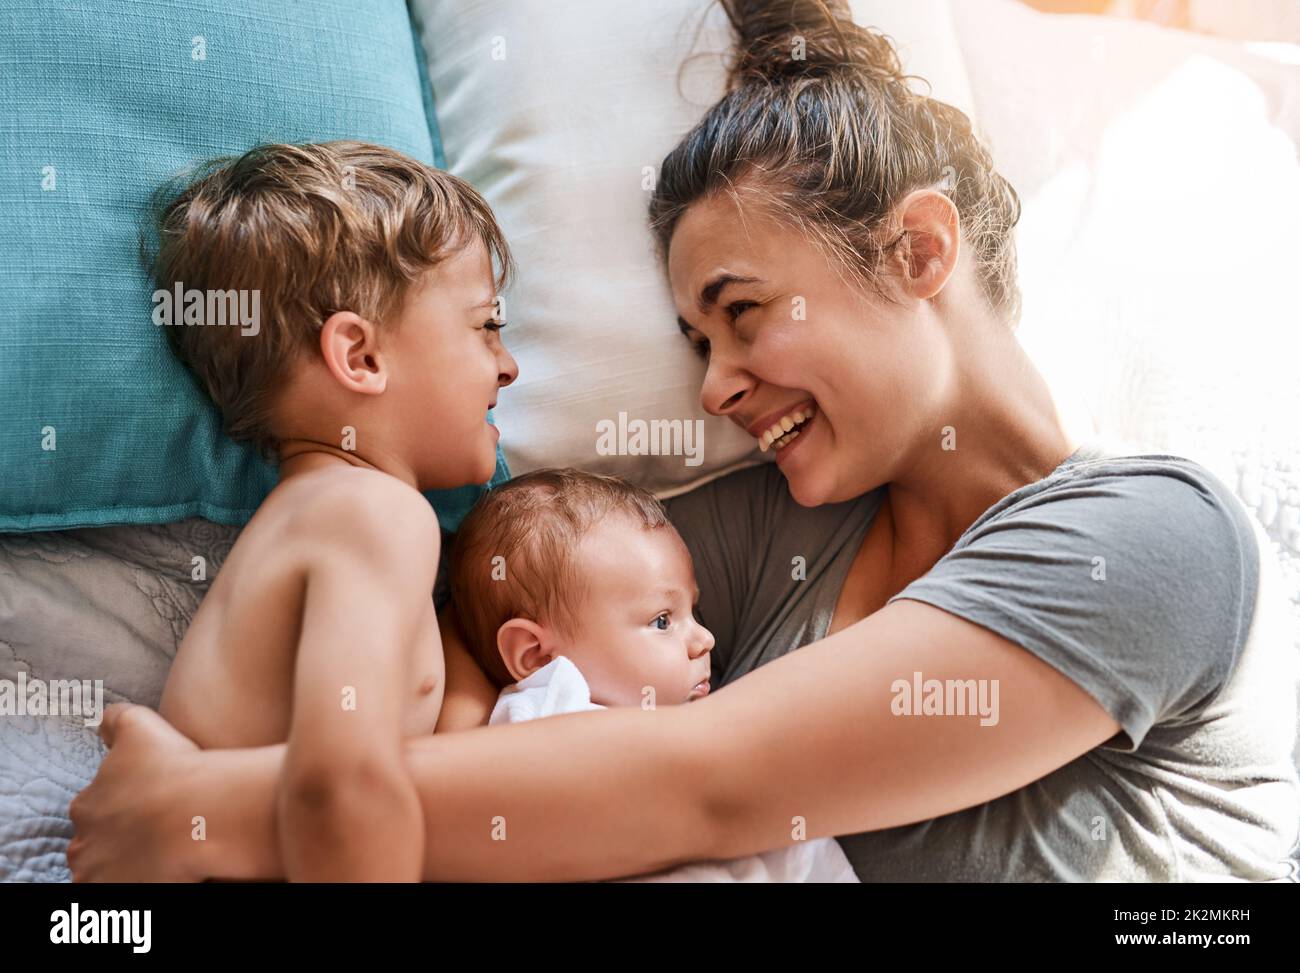 Her boys fill her life with joy. Shot of a young woman bonding with her two sons at home. Stock Photo